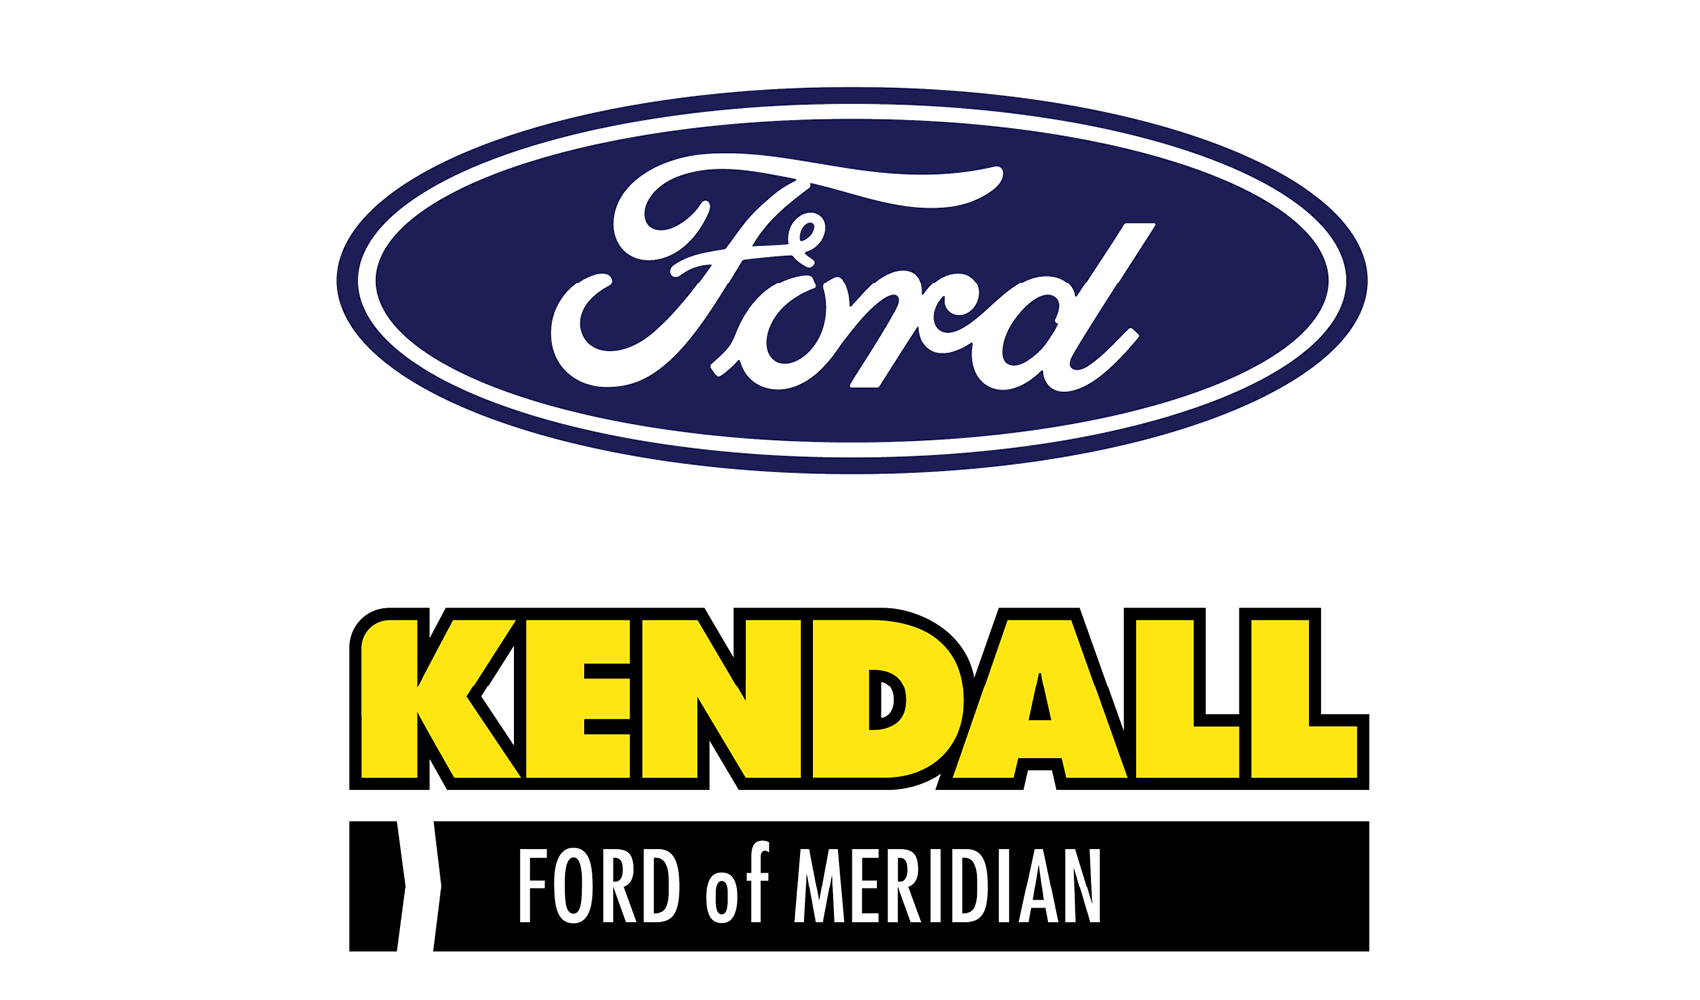 Ford + Kendall Ford of Meridian Logos